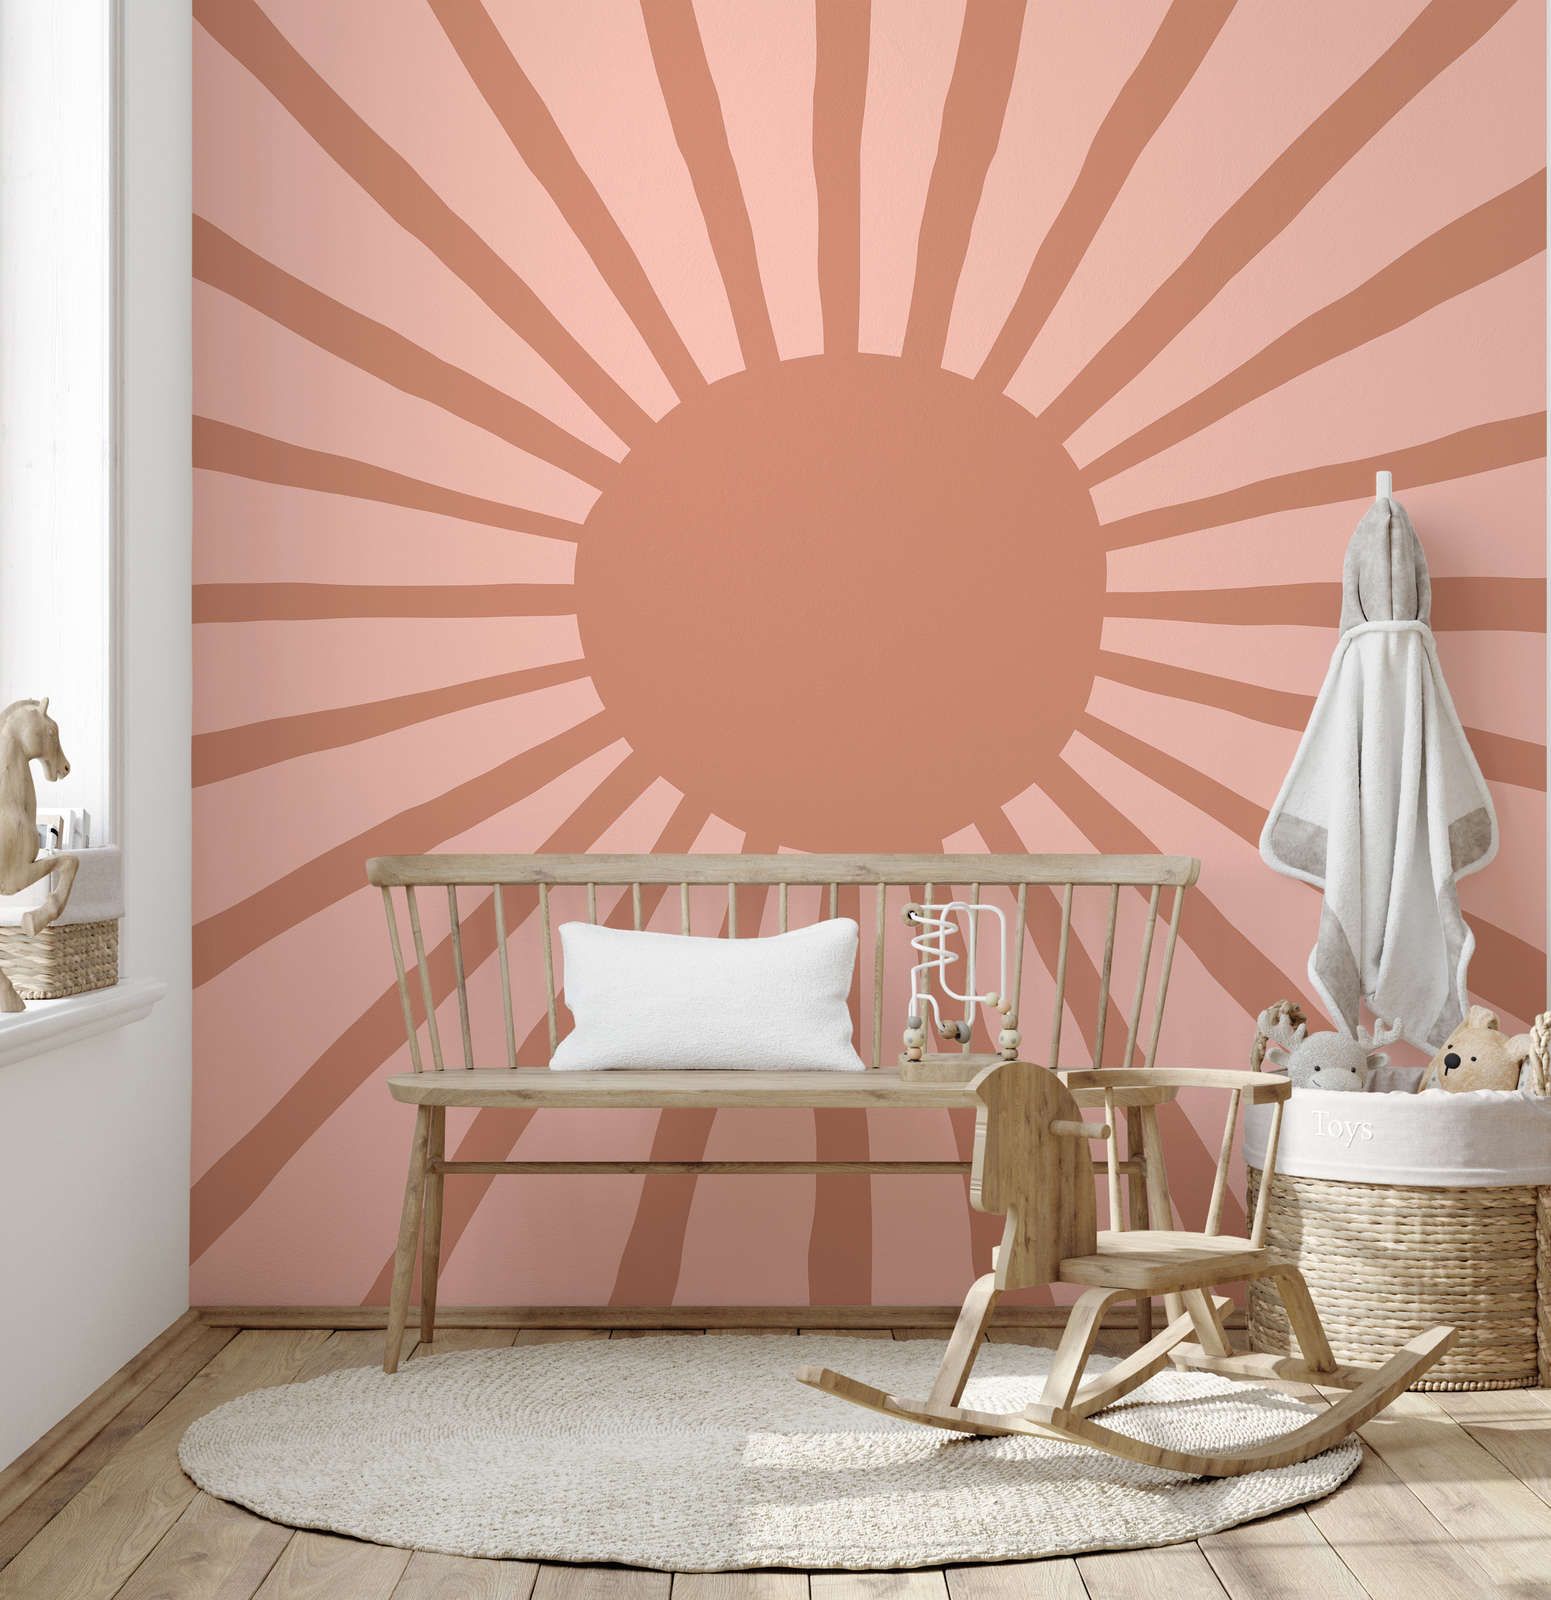             Painted Style Abstract Sun Wallpaper - Textured Non-woven
        